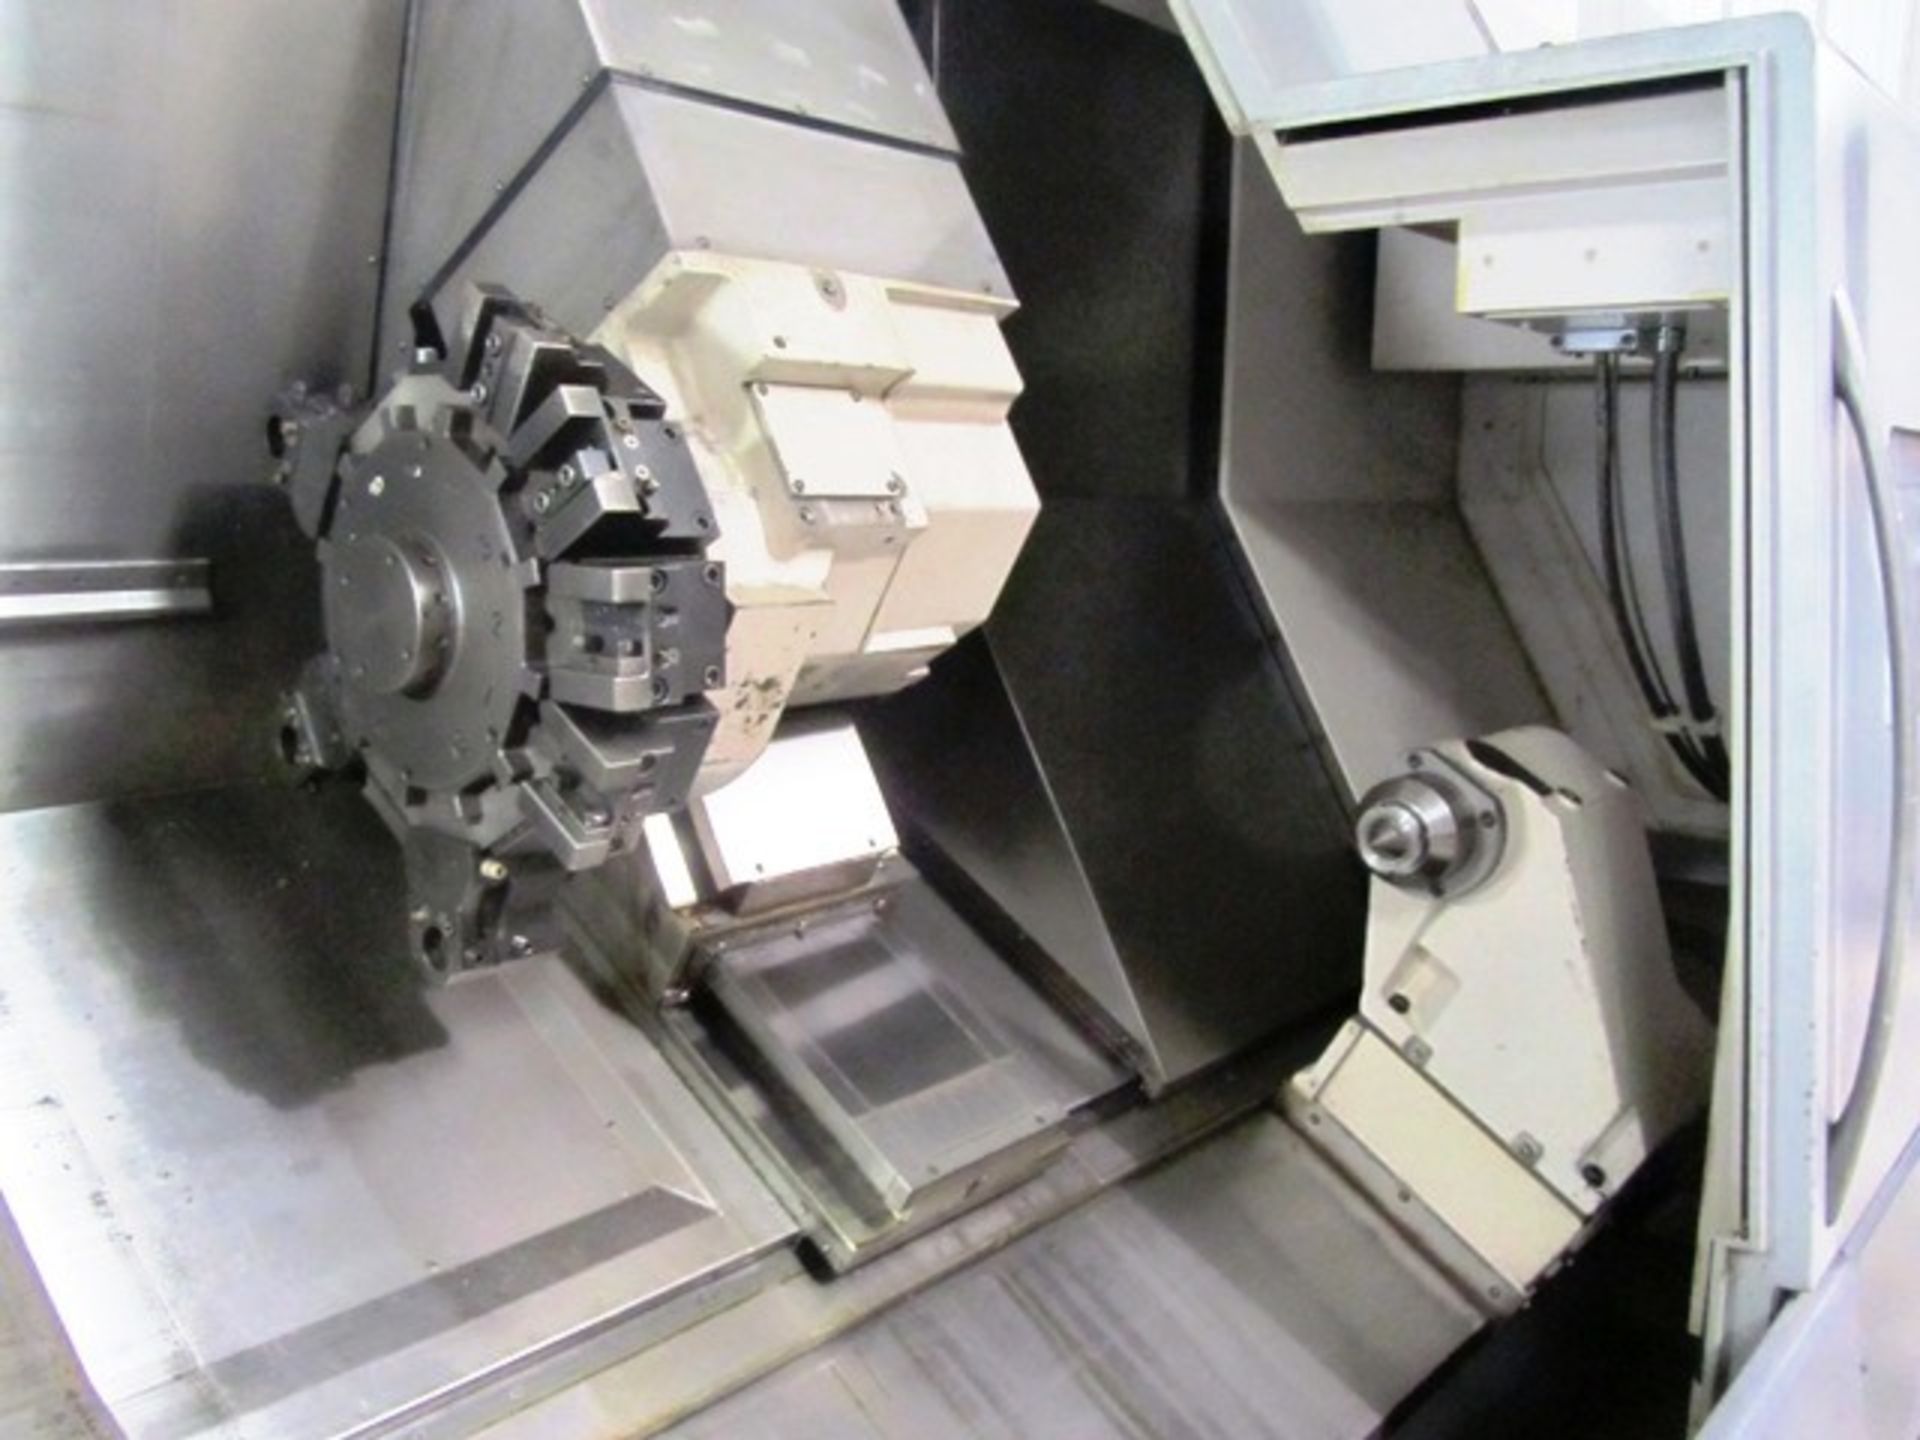 Okuma Space Turn Model LB4000EX - MY C1500 CNC Turning Center with Y-Axis, Milling, C-Axis, 15'' 3- - Bild 3 aus 6